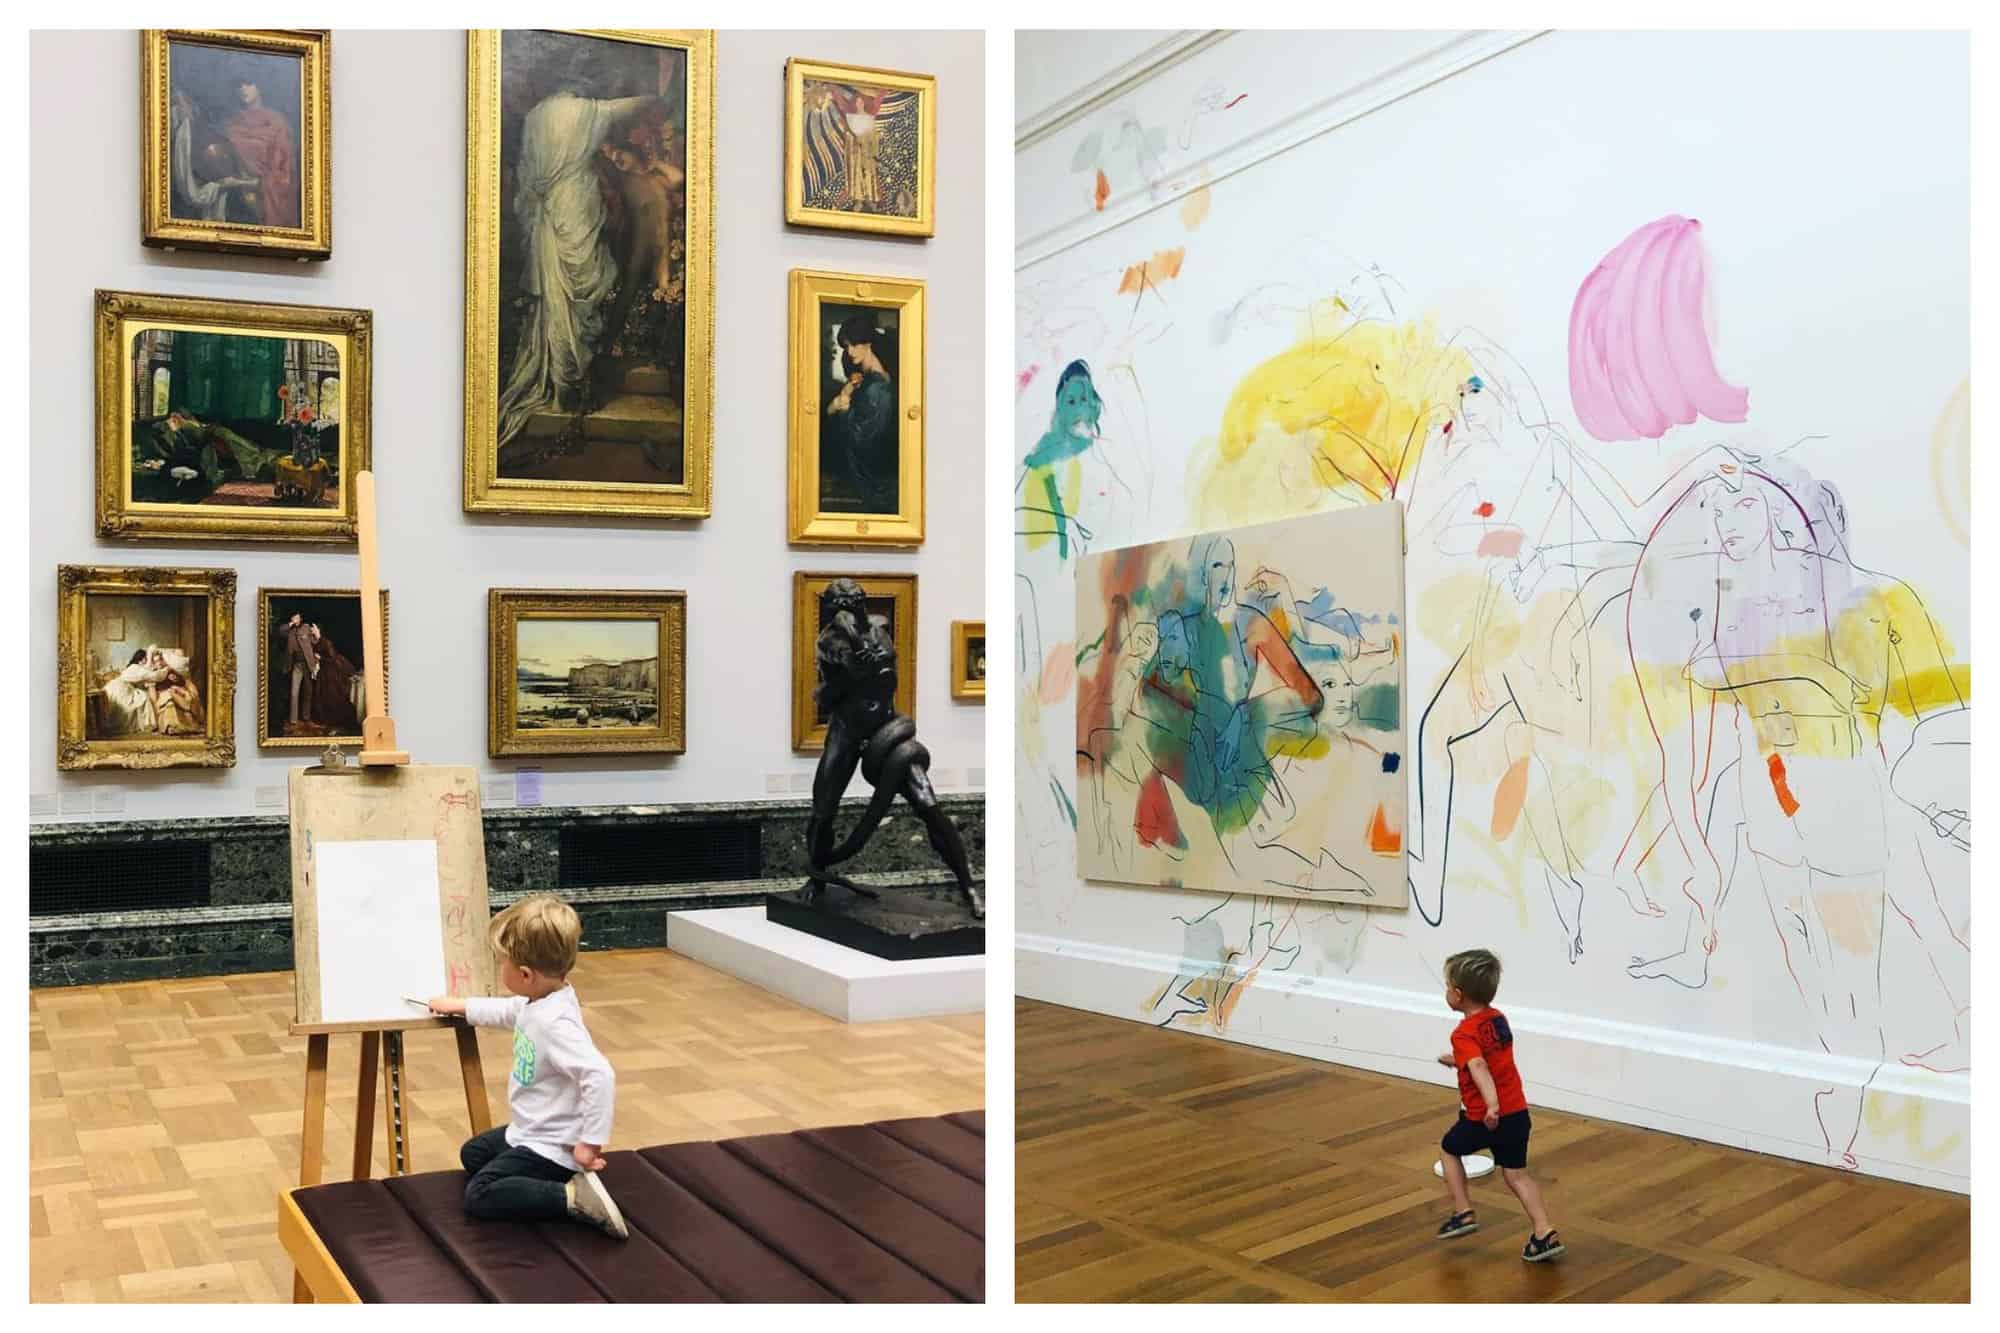 Left: A blonde toddler boy is painting a canvas inside an art museum full of paintings. Right: A toddler boy in a red shirt is running across an art museum with abstract paintings.